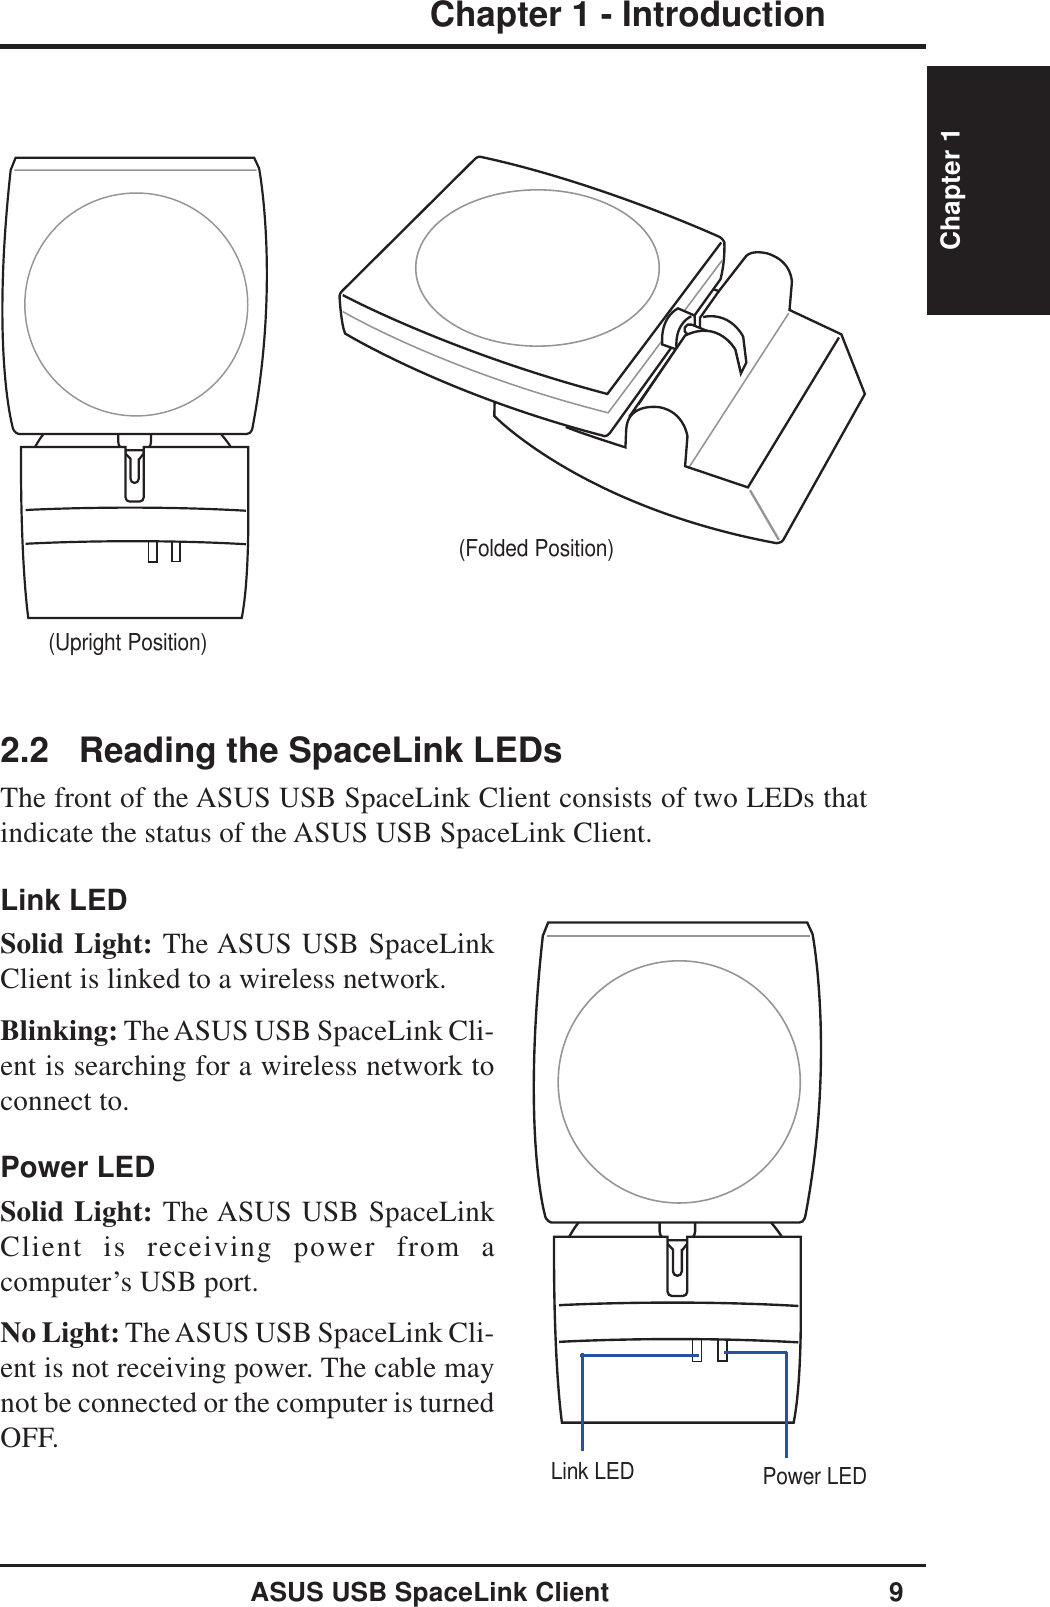 ASUS USB SpaceLink Client 9Chapter 1 - IntroductionChapter 1(Upright Position)(Folded Position)2.2 Reading the SpaceLink LEDsThe front of the ASUS USB SpaceLink Client consists of two LEDs thatindicate the status of the ASUS USB SpaceLink Client.Link LEDSolid Light: The ASUS USB SpaceLinkClient is linked to a wireless network.Blinking: The ASUS USB SpaceLink Cli-ent is searching for a wireless network toconnect to.Power LEDSolid Light: The ASUS USB SpaceLinkClient is receiving power from acomputer’s USB port.No Light: The ASUS USB SpaceLink Cli-ent is not receiving power. The cable maynot be connected or the computer is turnedOFF.Link LED Power LED